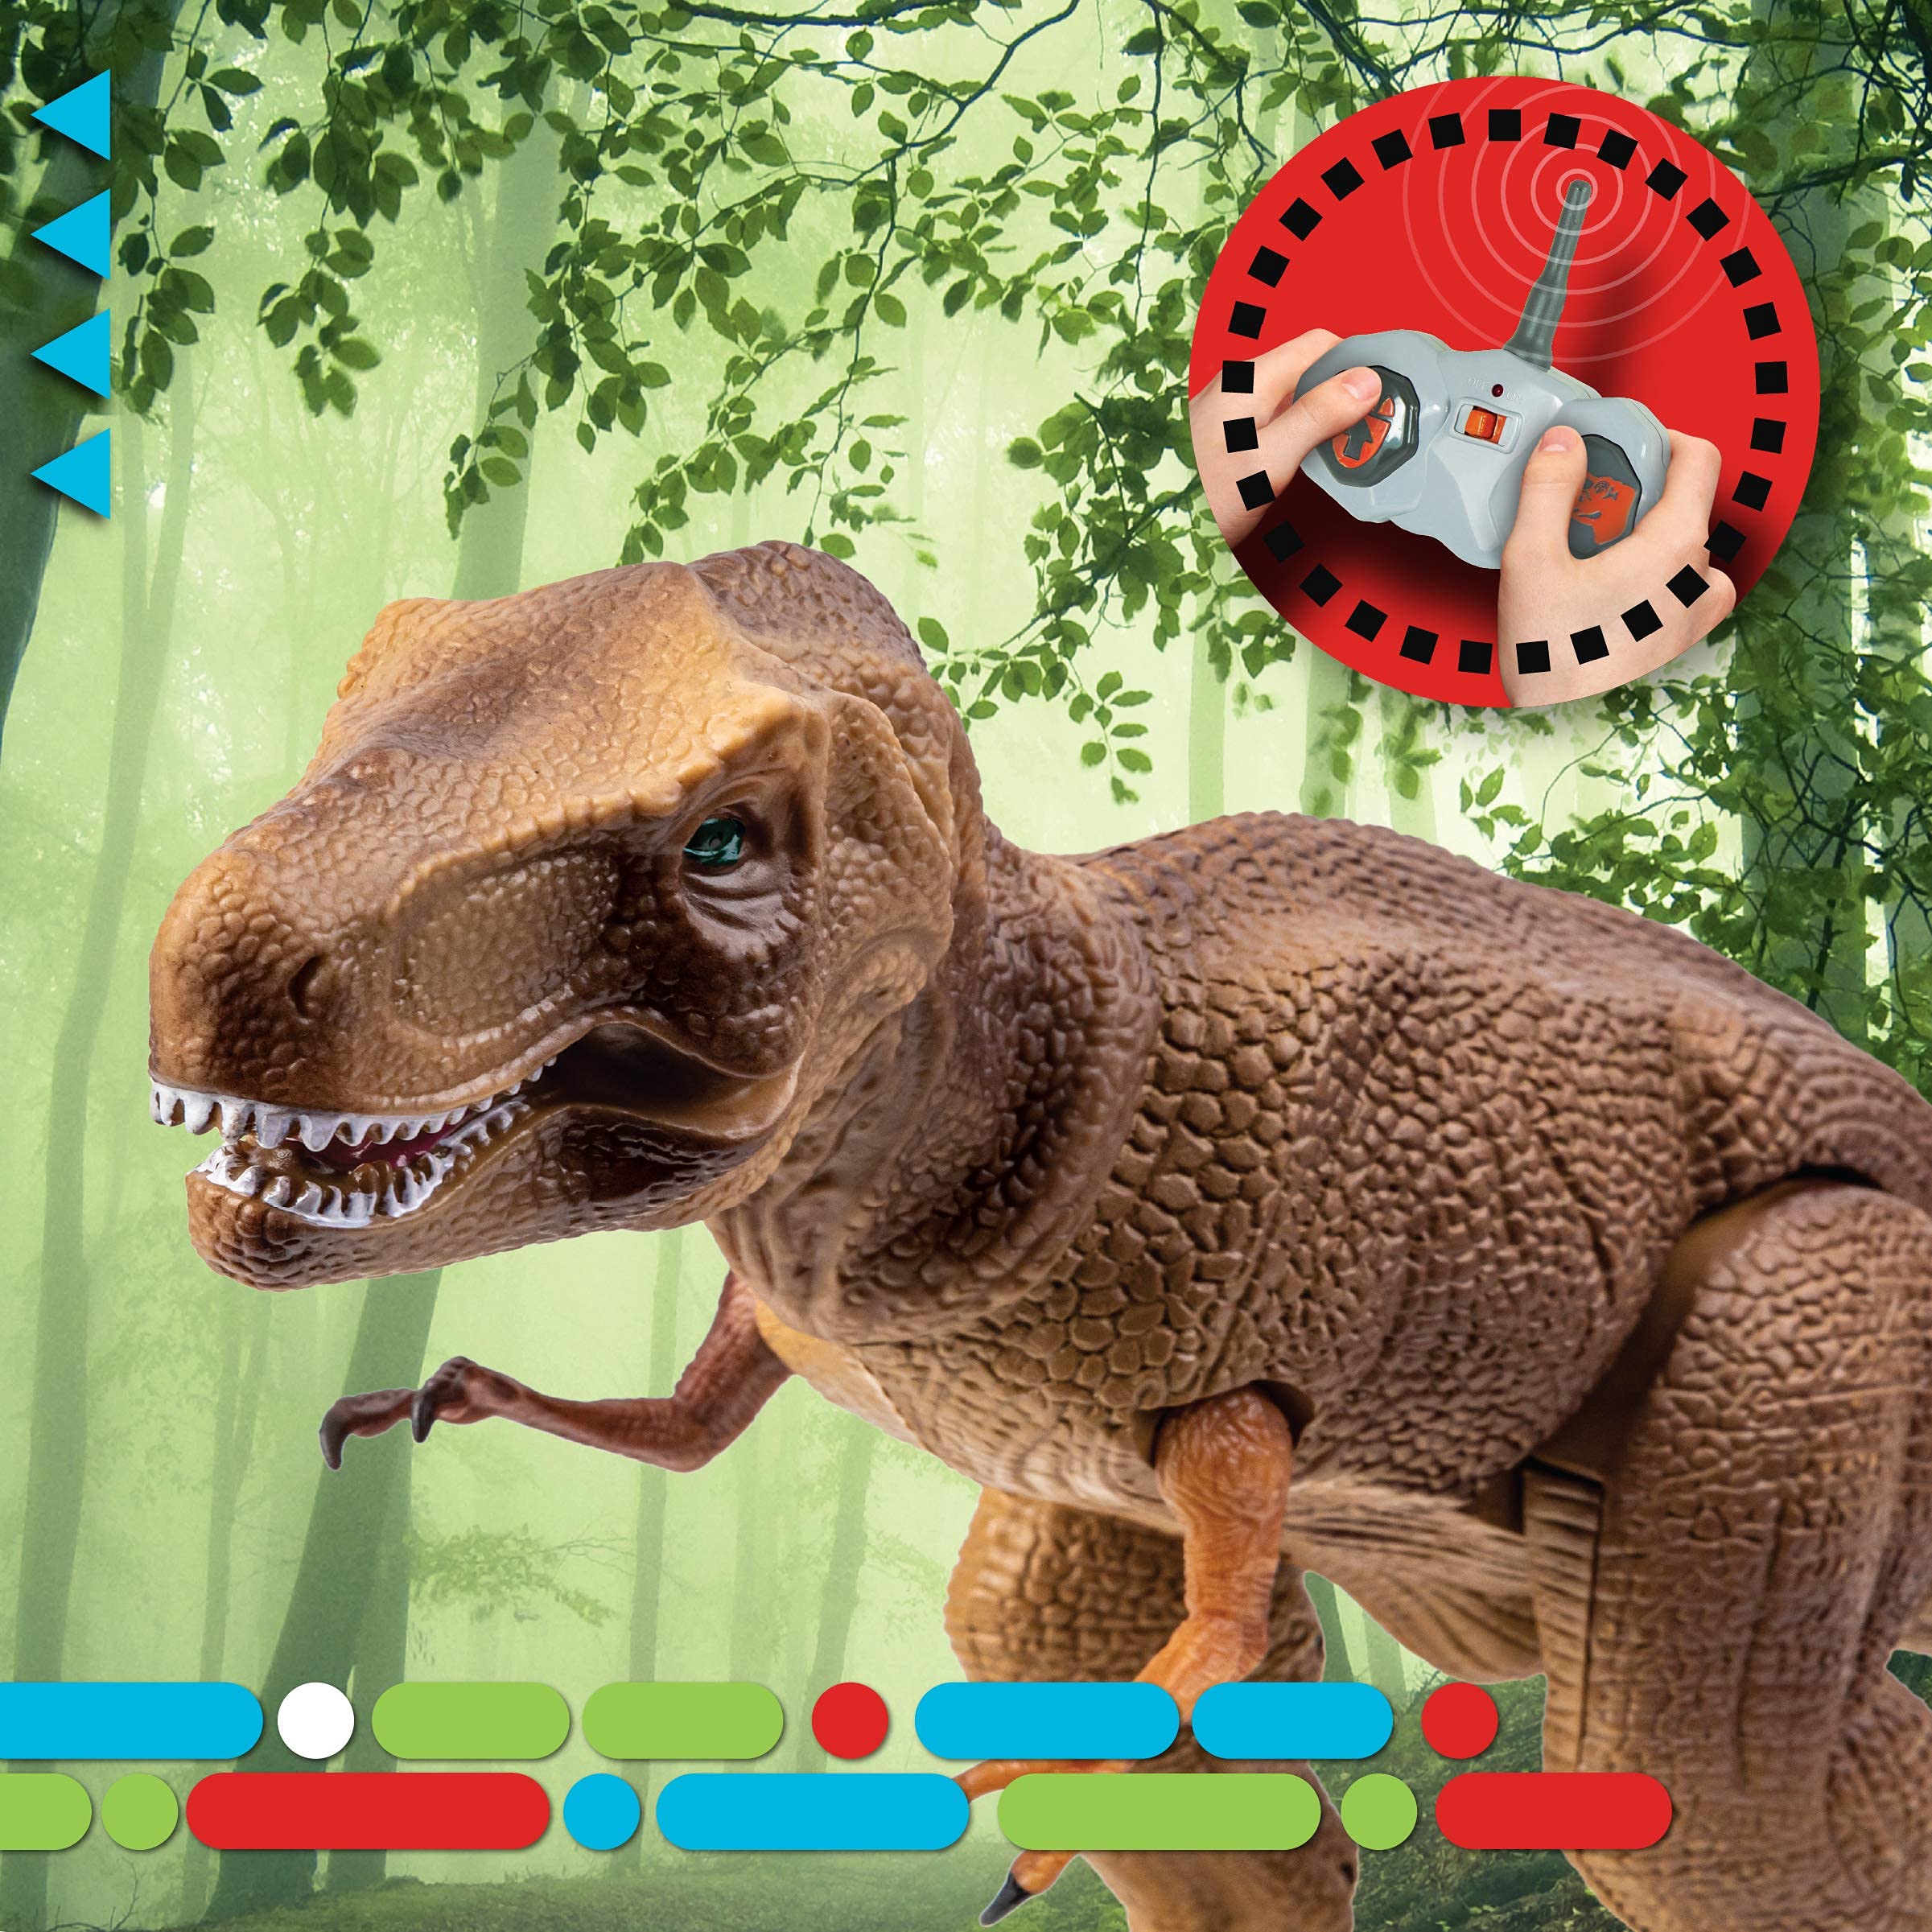 Discovery Kids Remote Control RC T Rex Dinosaur Electronic Toy Action Figure Moving & Walking Robot w/Roaring Sounds & Chomping Mouth, Realistic Plastic Model, Boys & Girls 6 Years Old+